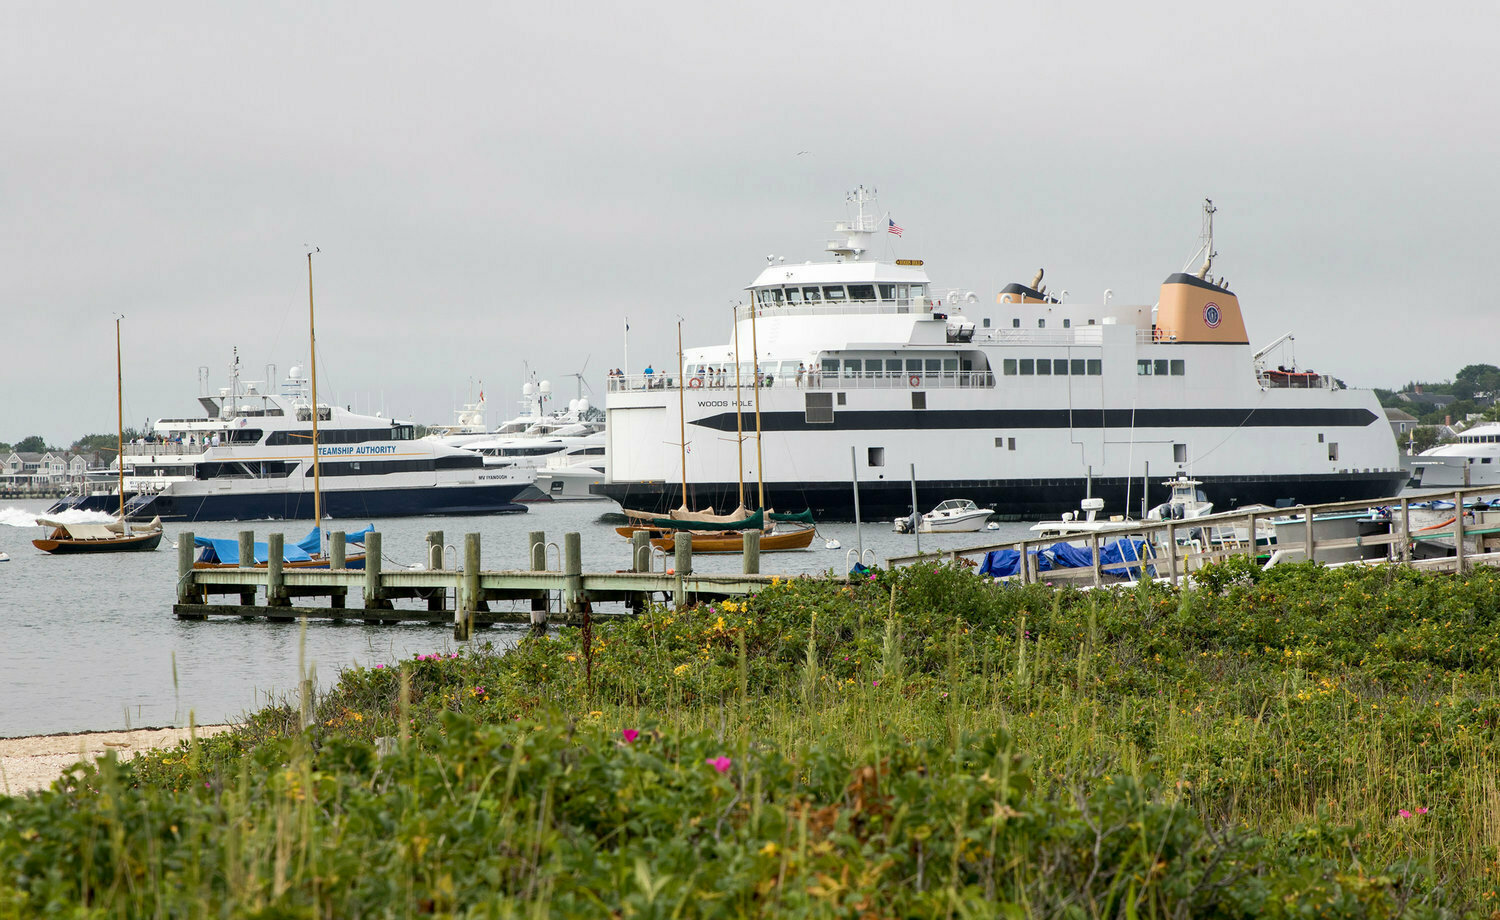 The Steamship Authority’s car ferry Woods Hole leaving its berth while the fast ferry Iyanough arrives in Nantucket Harbor.